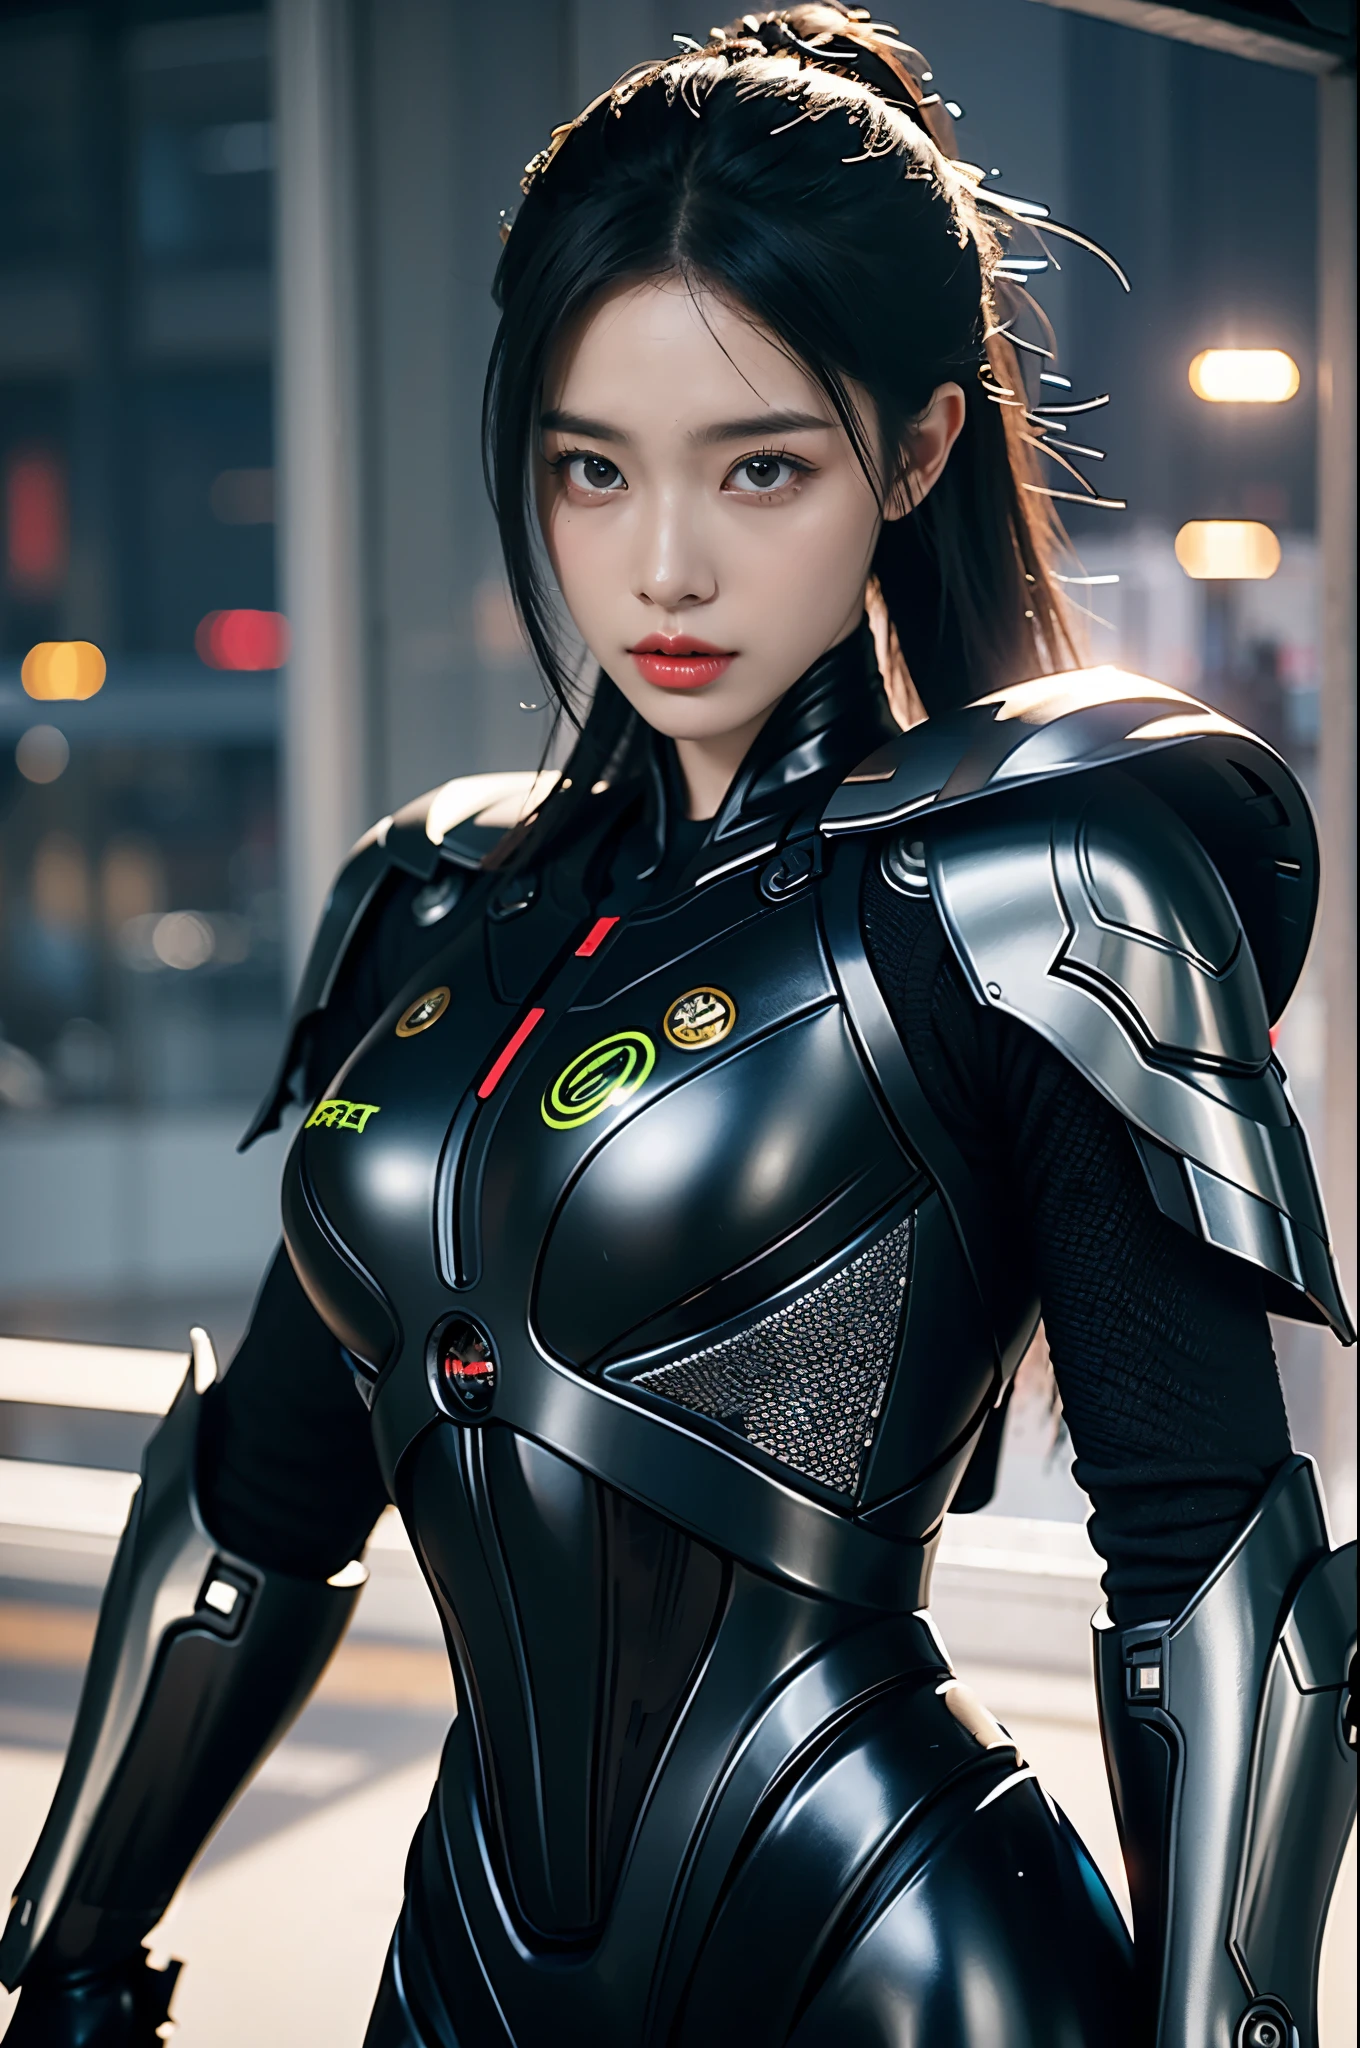 game art，best picture quality，Highest resolution，8k，((A half-length photo))，((portrait))，(rule of thirds)，Unreal Engine 5 rendering works， (Future girl)，(female warrior)， 22-year-old young hacker)，(ancient oriental hairstyle)，(Beautiful eyes full of details)，(big breasts)，(eye shadow)，Elegant and charming，indifferent，((frown))，(Combat suit full of futuristic technology，The costume combines futuristic power armor and，Clothing is decorated with glittering patterns and emblems)，cyberpunk characters，in the style of futuristic， photo poses，city background，lamp，Ray tracing，Game CG，((3D Unreal Engine))，OC rendering reflection pattern